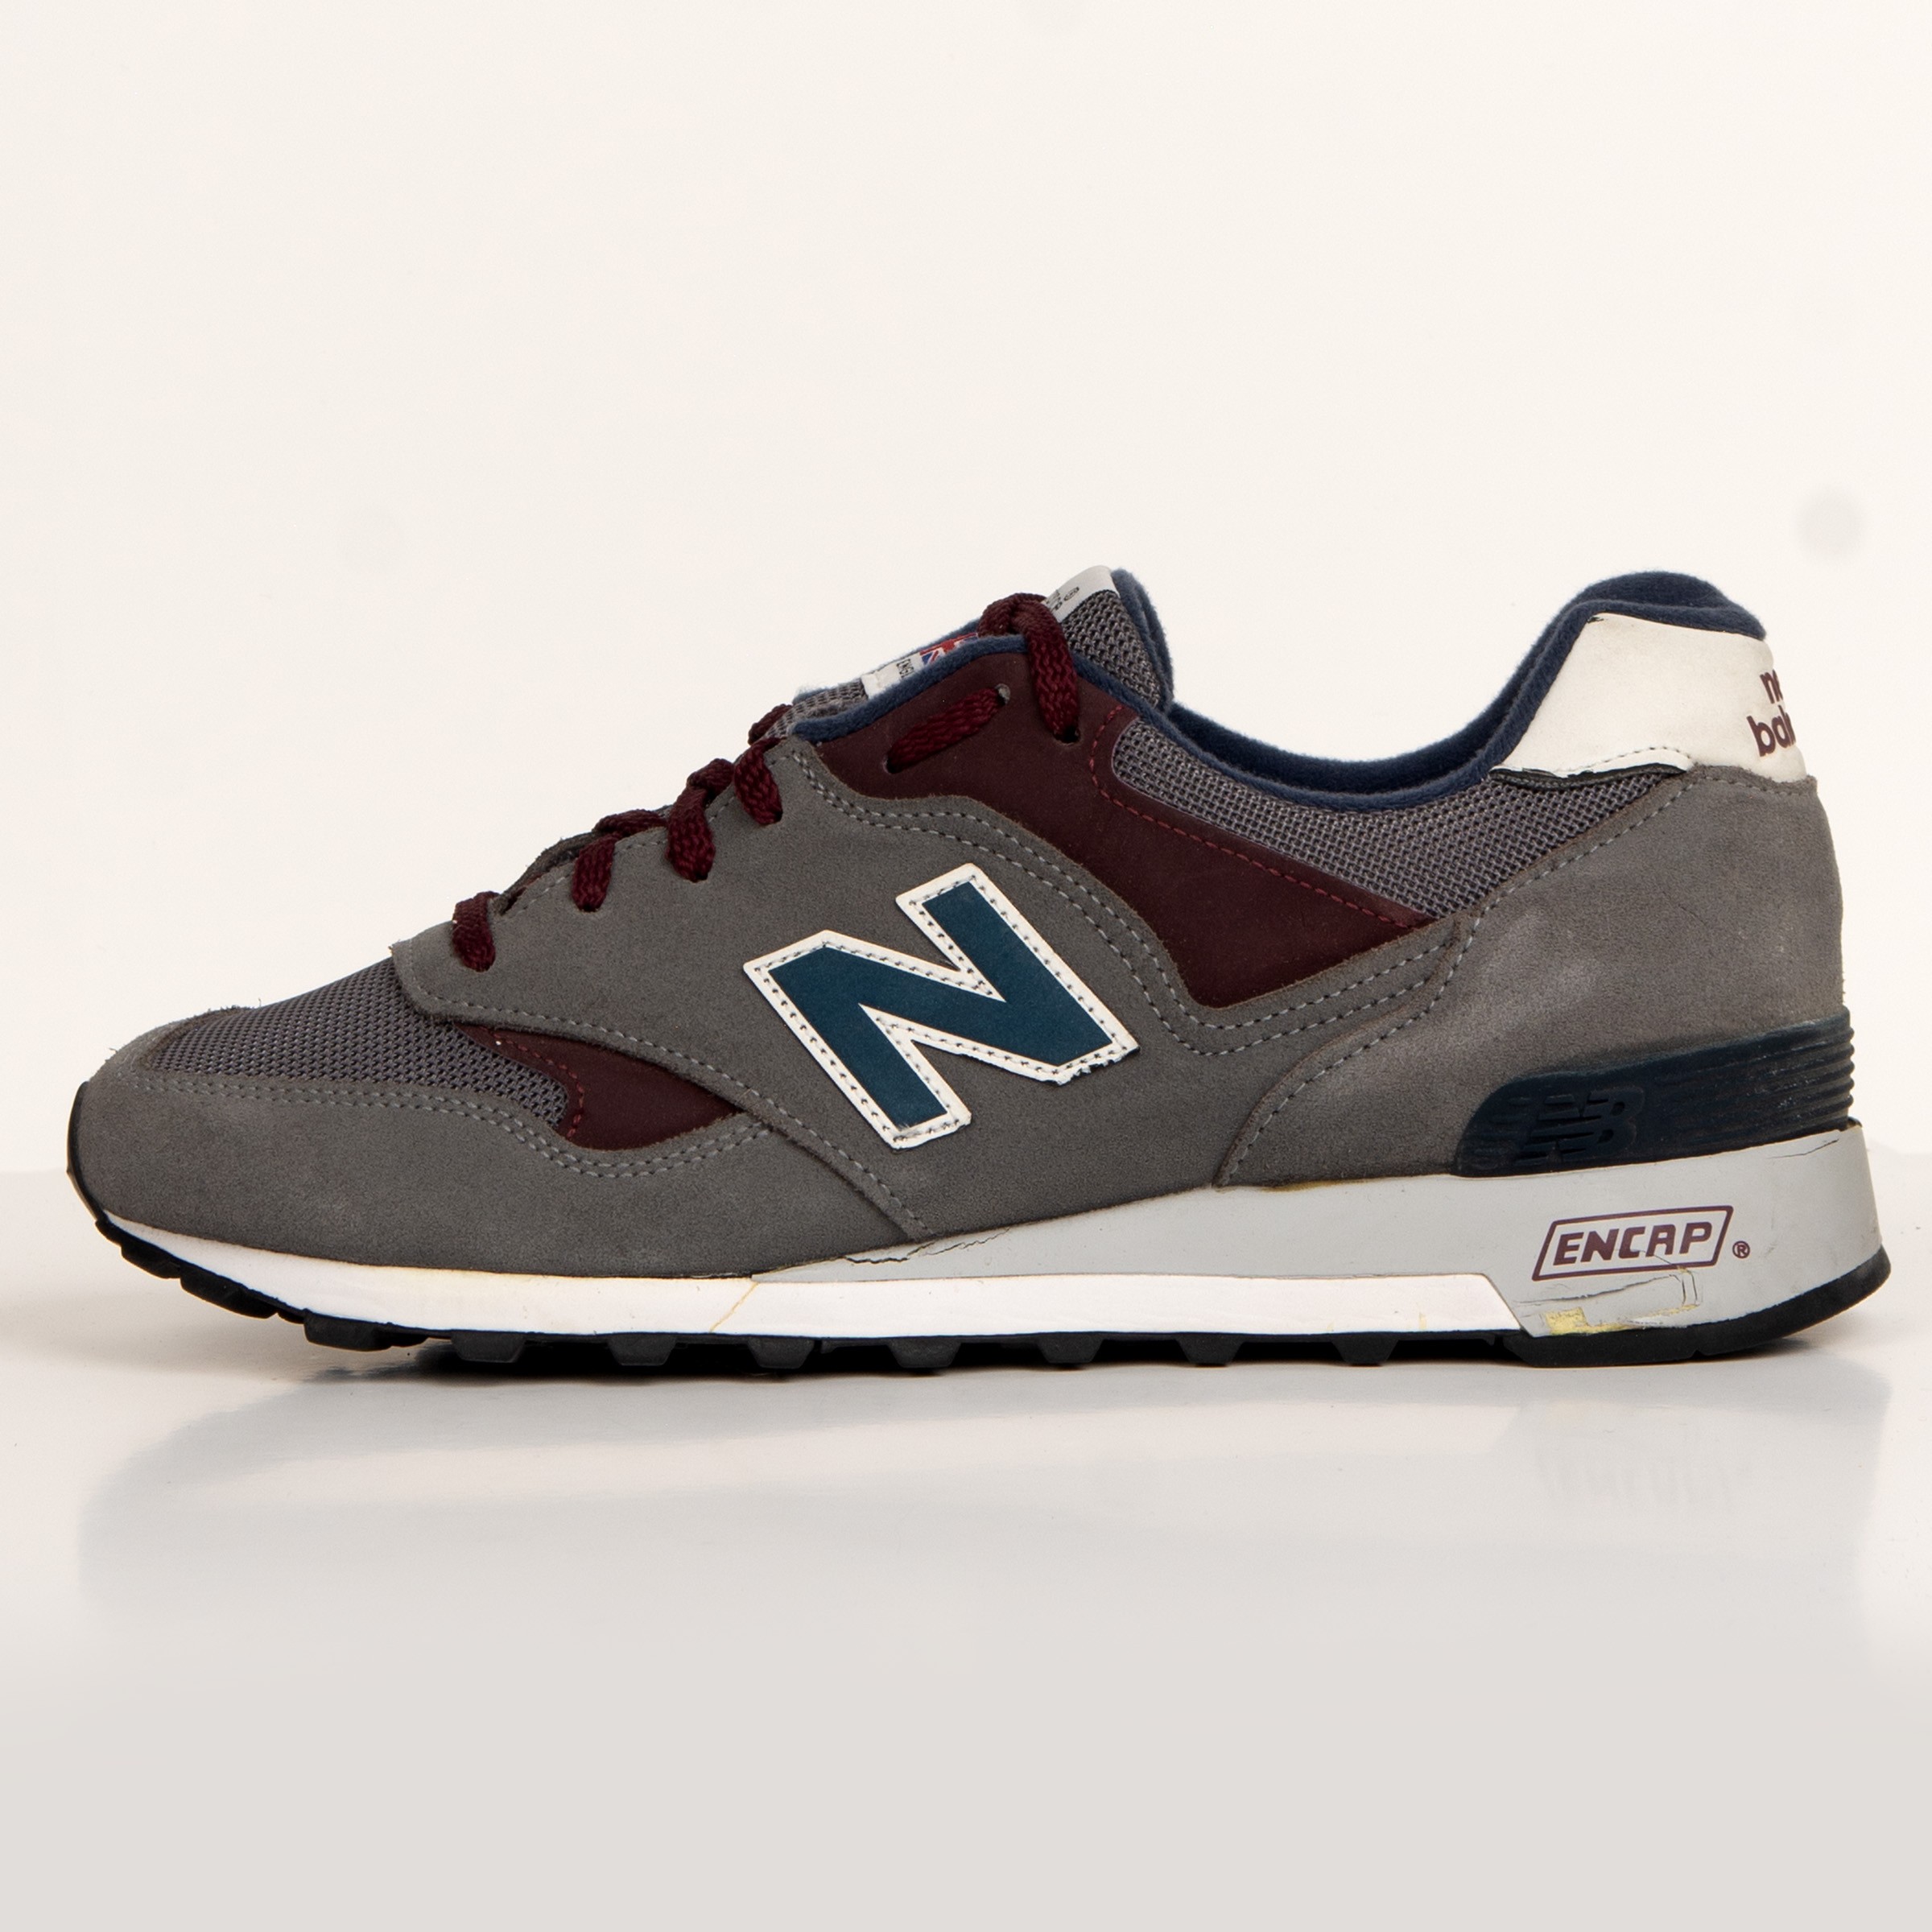 RE-POCKETS NEW BALANCE TRAINERS GREY